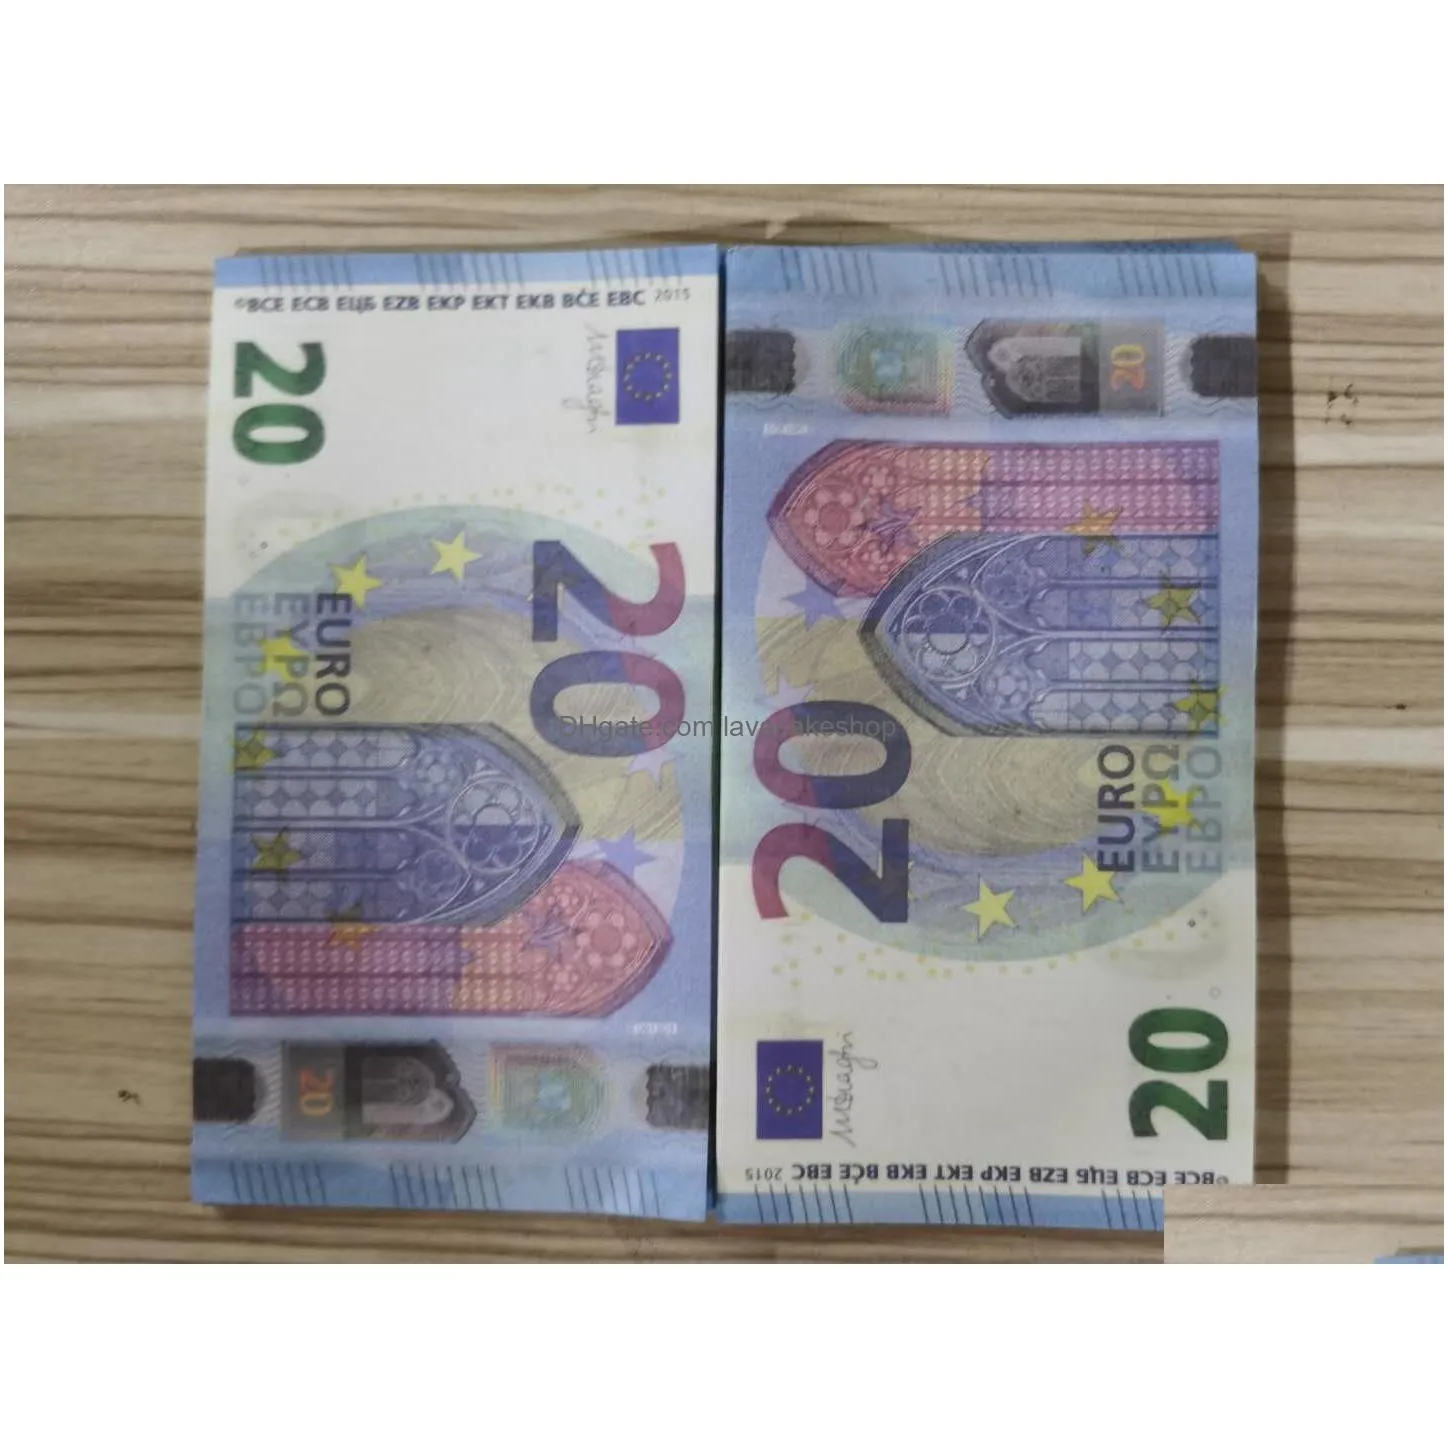 bank euros most movie note copy money nightclub realistic play business 20 prop fake paper 15 for collection wstox